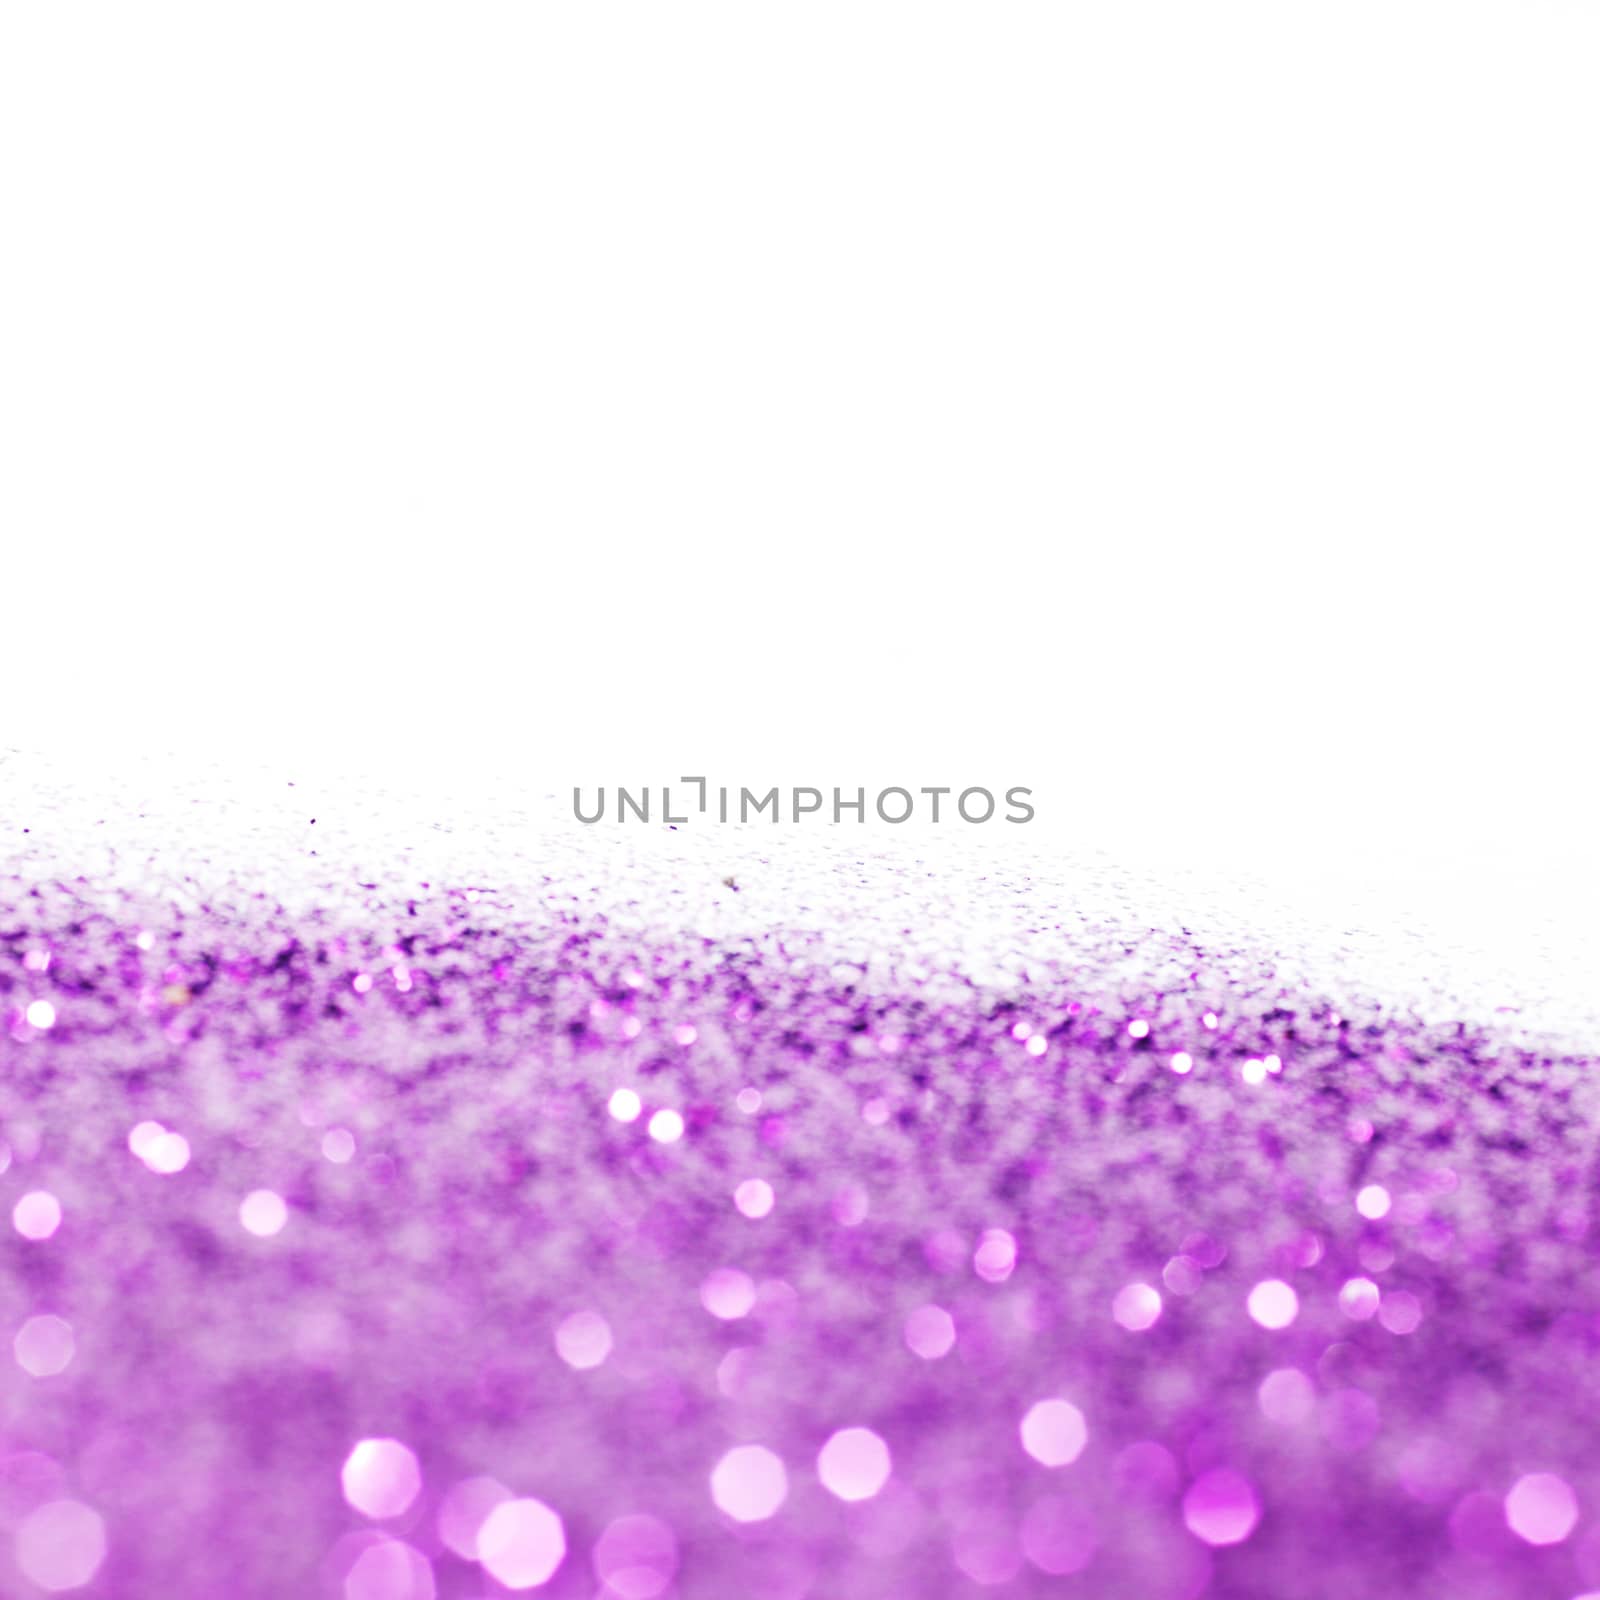 Purple shiny glitter holiday background with white copy space